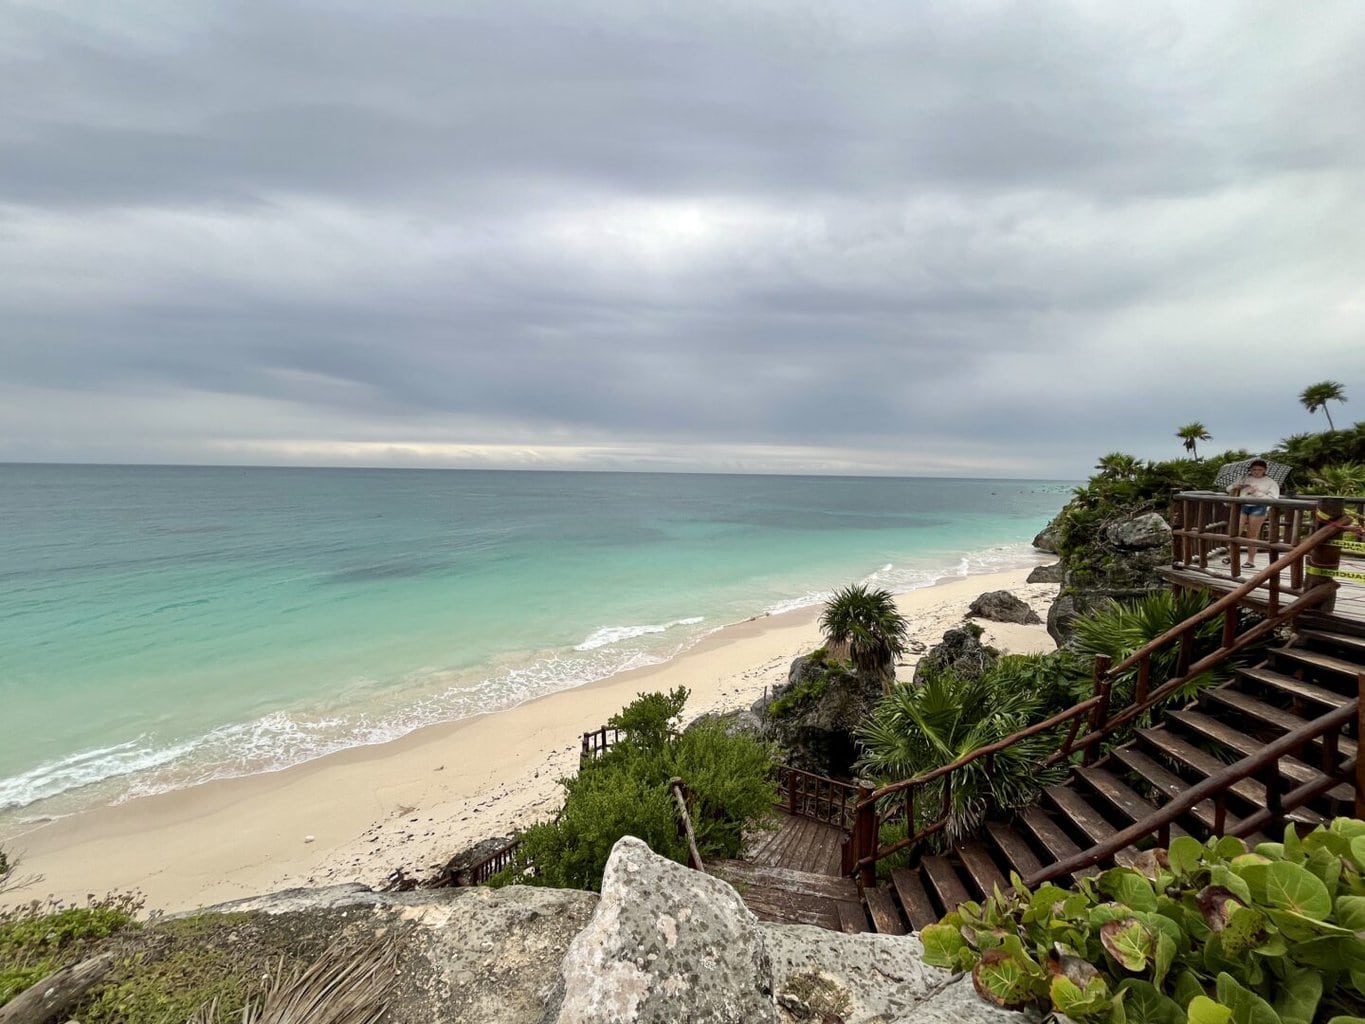 Tulum was a major Mayan city and served as a significant port during the late Postclassic period (AD 1200 to 1521). The ruins are situated on the cliffs along the Caribbean Sea and are known for their stunning coastal views.